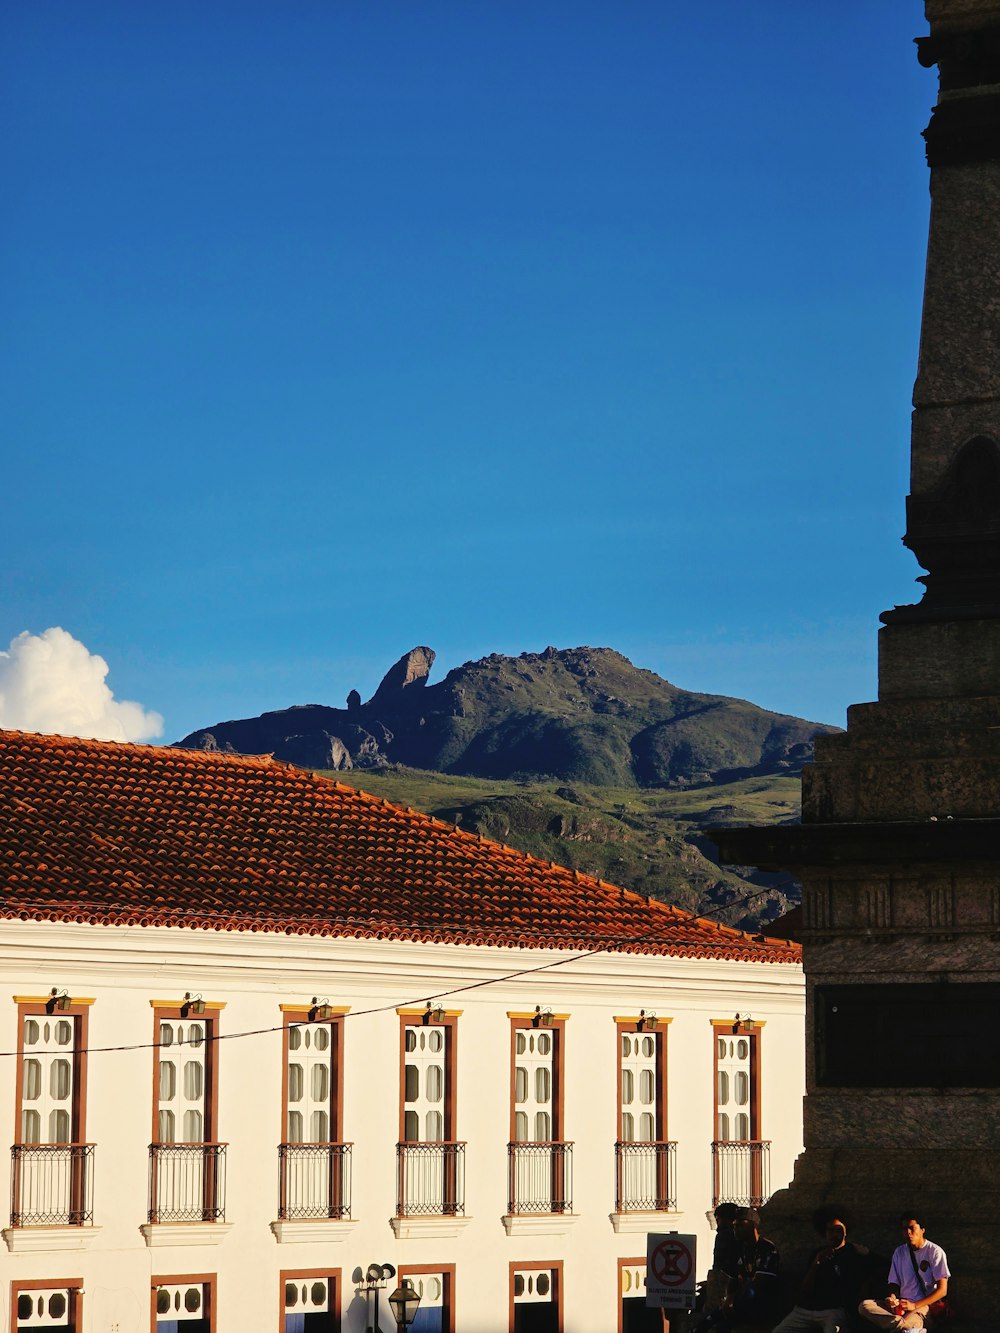 a building with a clock tower and a mountain in the background